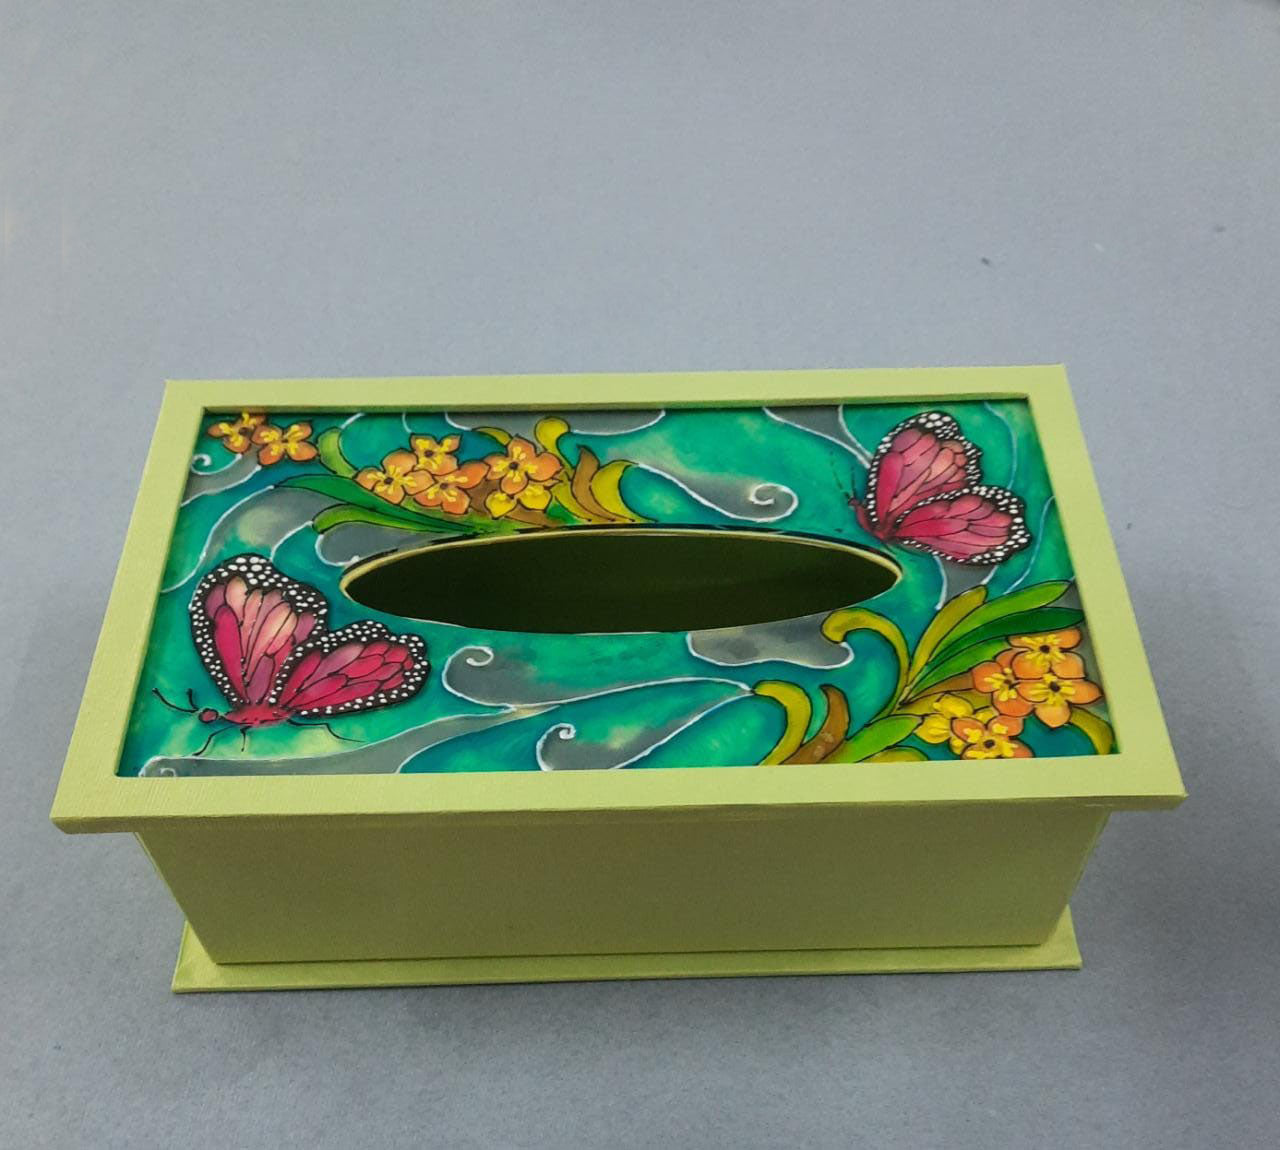 Tissue Paper Box Holder made with Handmade Paper